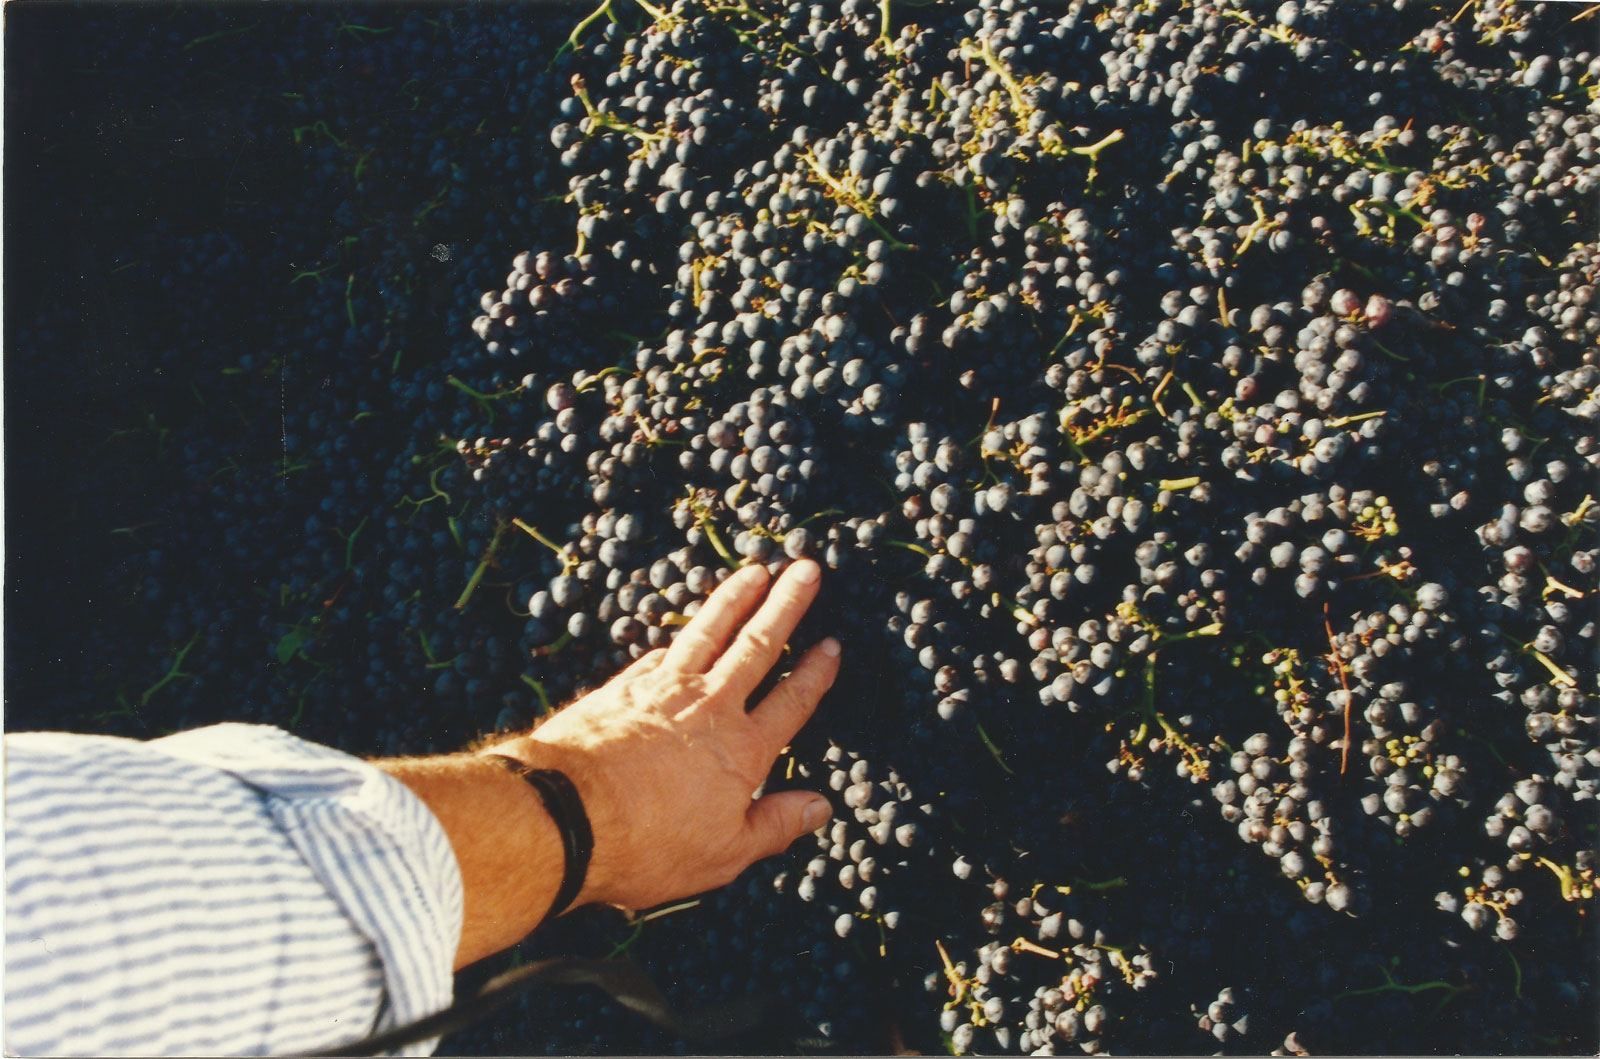 Hands touching grape clusters